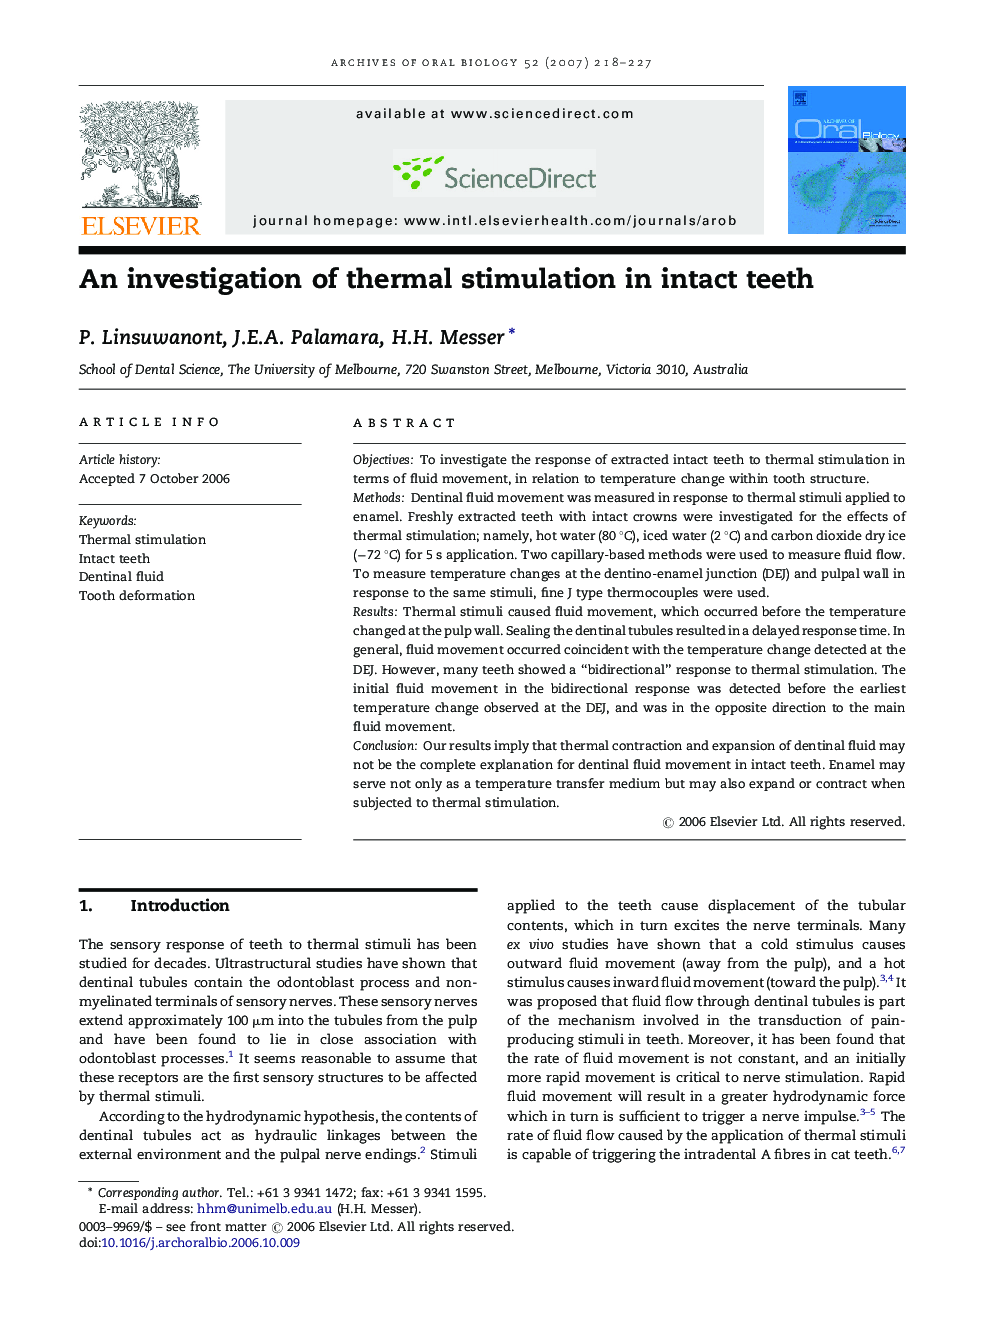 An investigation of thermal stimulation in intact teeth